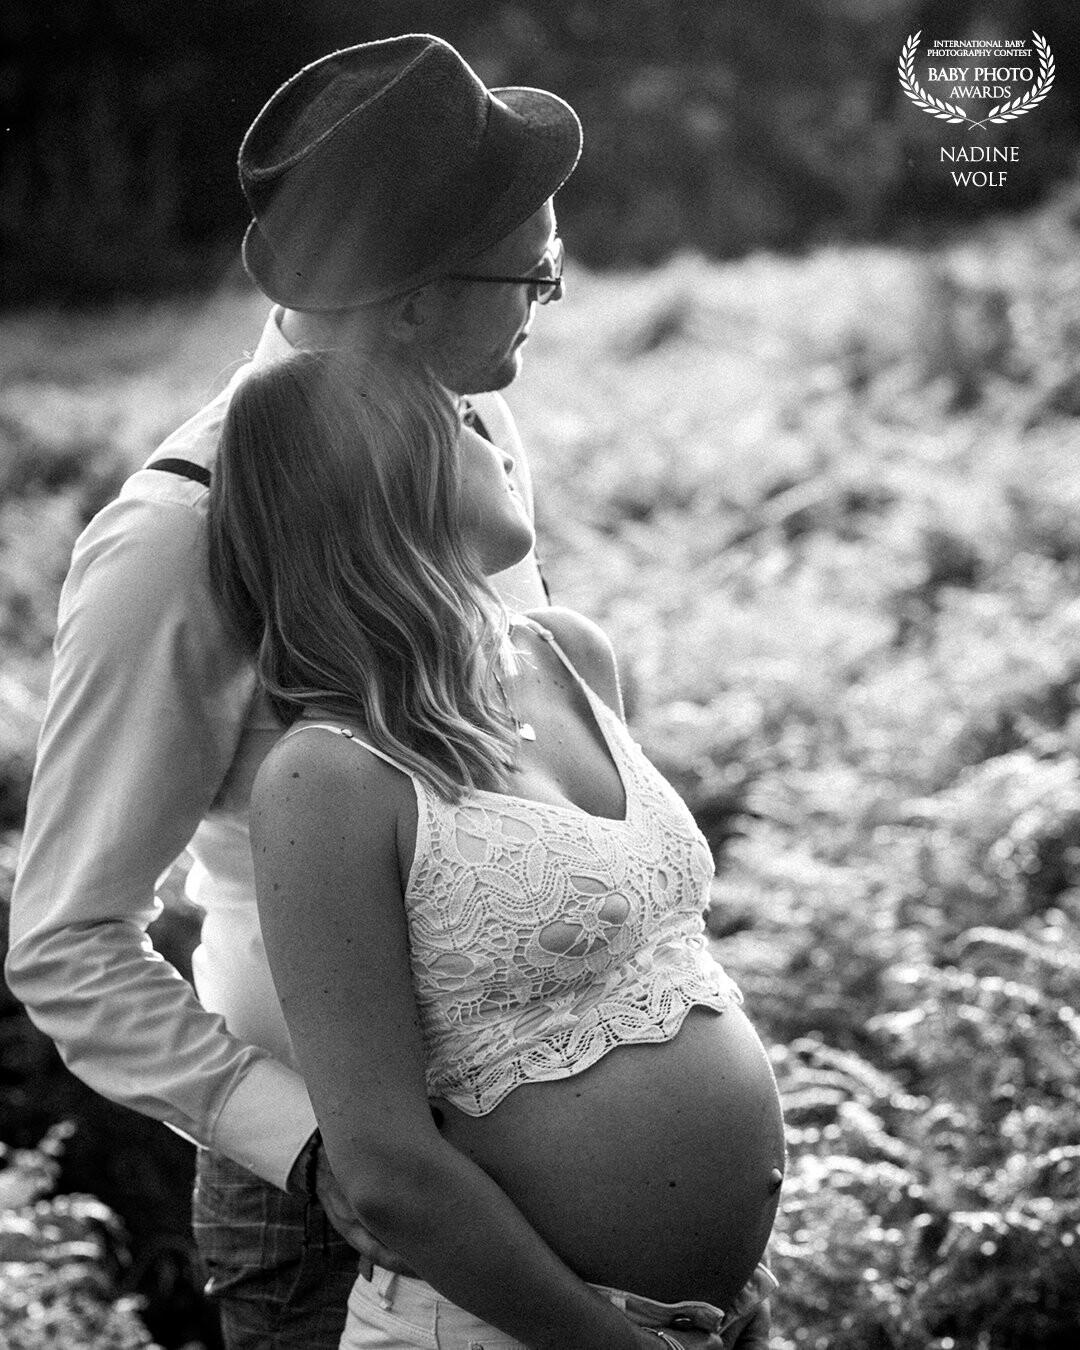 This beautiful picture was taken in the Wahner Heide. The mood between the two of them, the light and the anticipation of their future together as parents were just perfect.